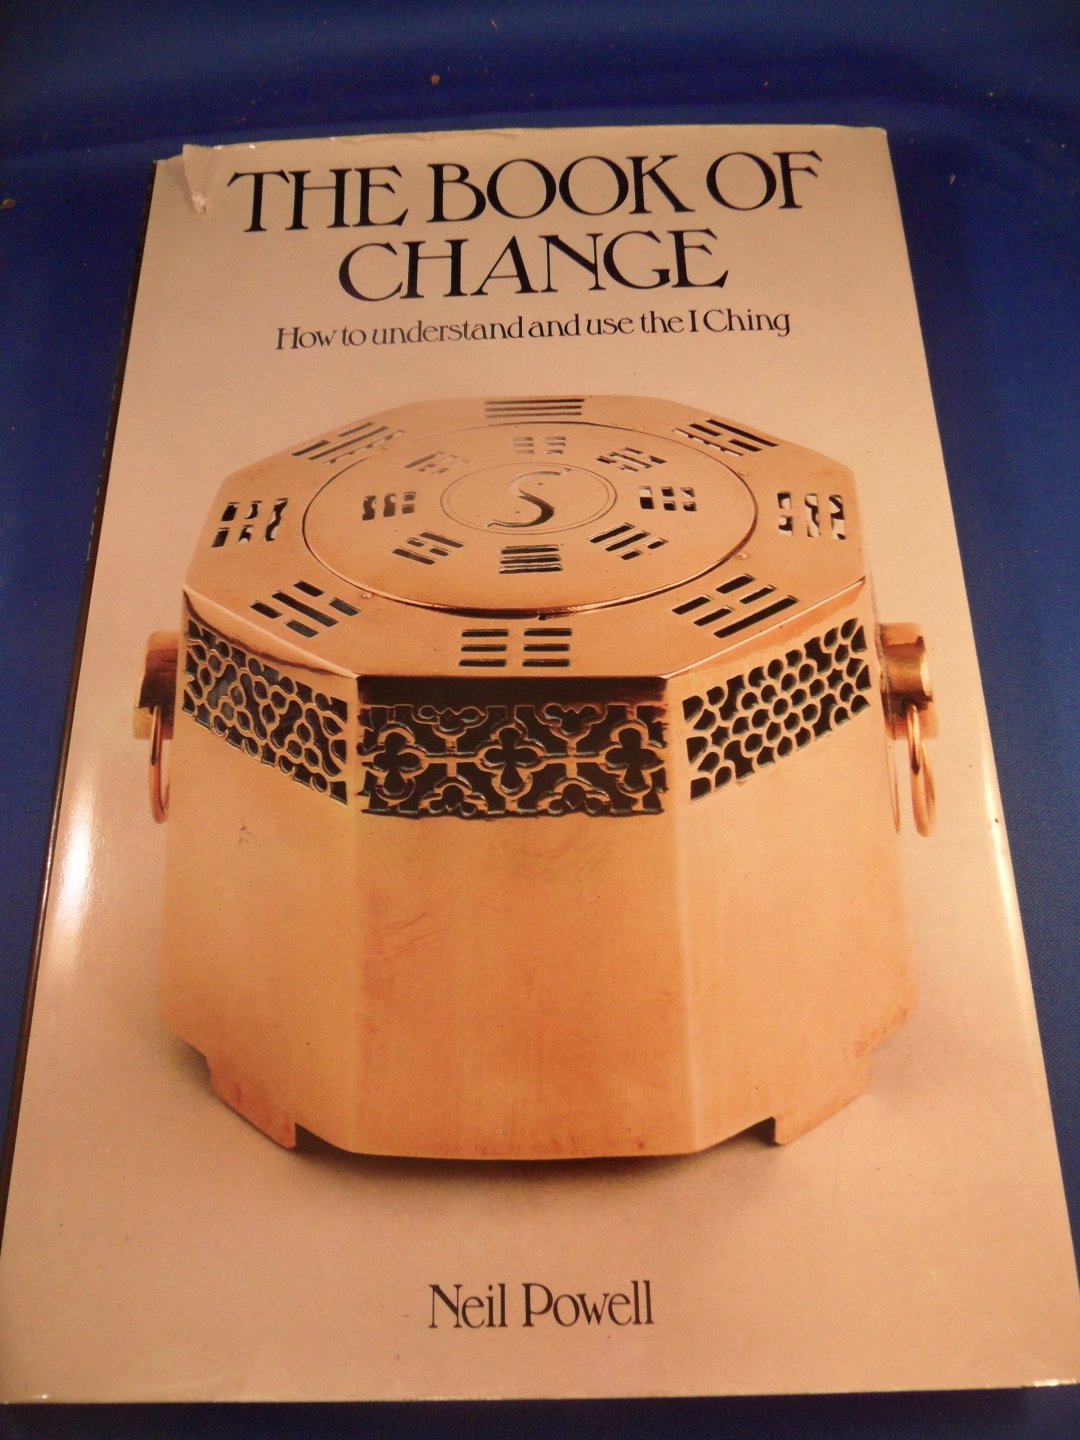 Powell, Neil - The book of change. How to understand and use the I Ching